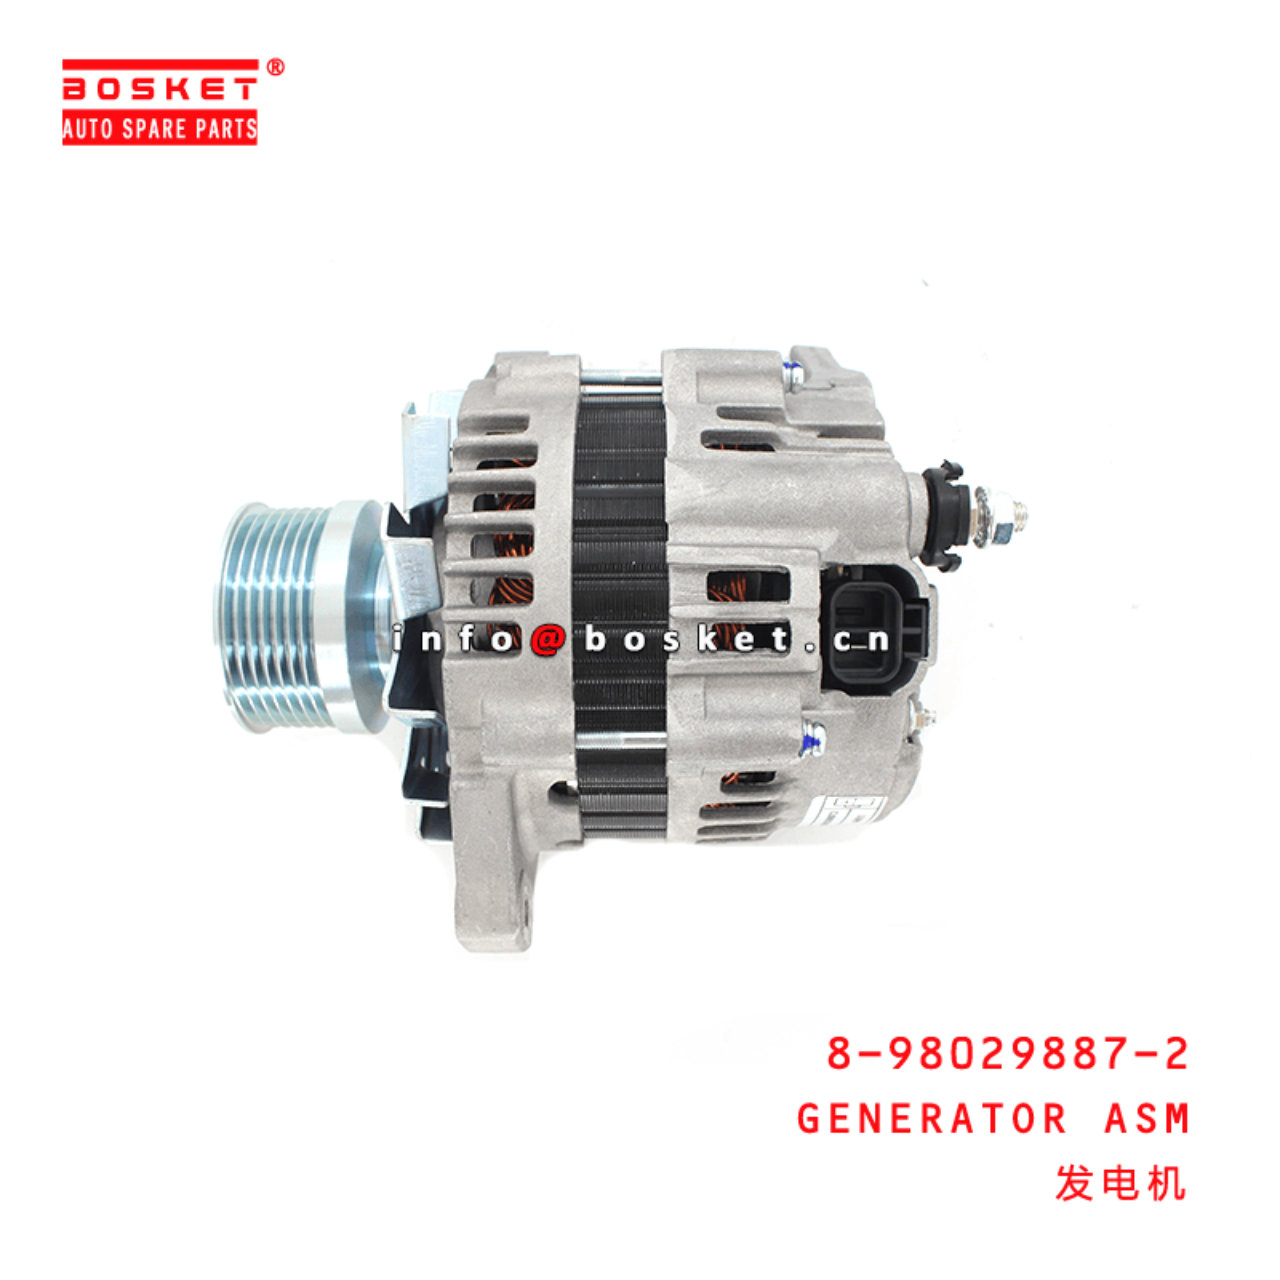 8-98029887-2 Generator Assembly 8980298872 Suitable for ISUZU NKR 